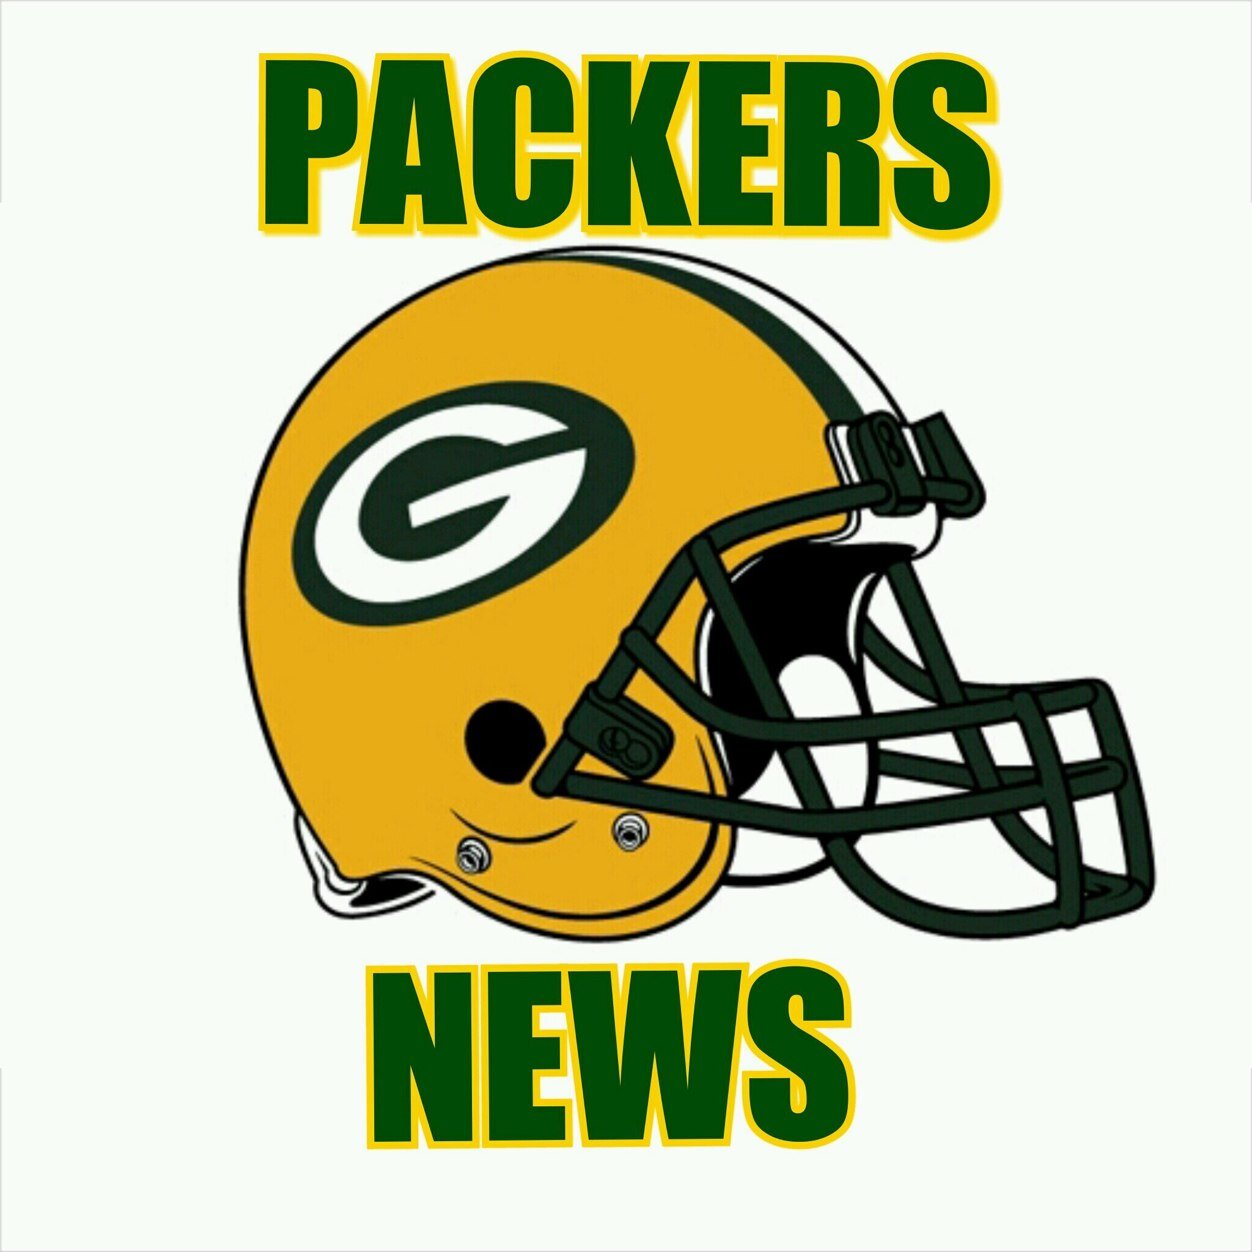 All the Latest news and rumours from the Green Bay Packers. Show your support for the Green and Gold! #gopackgo